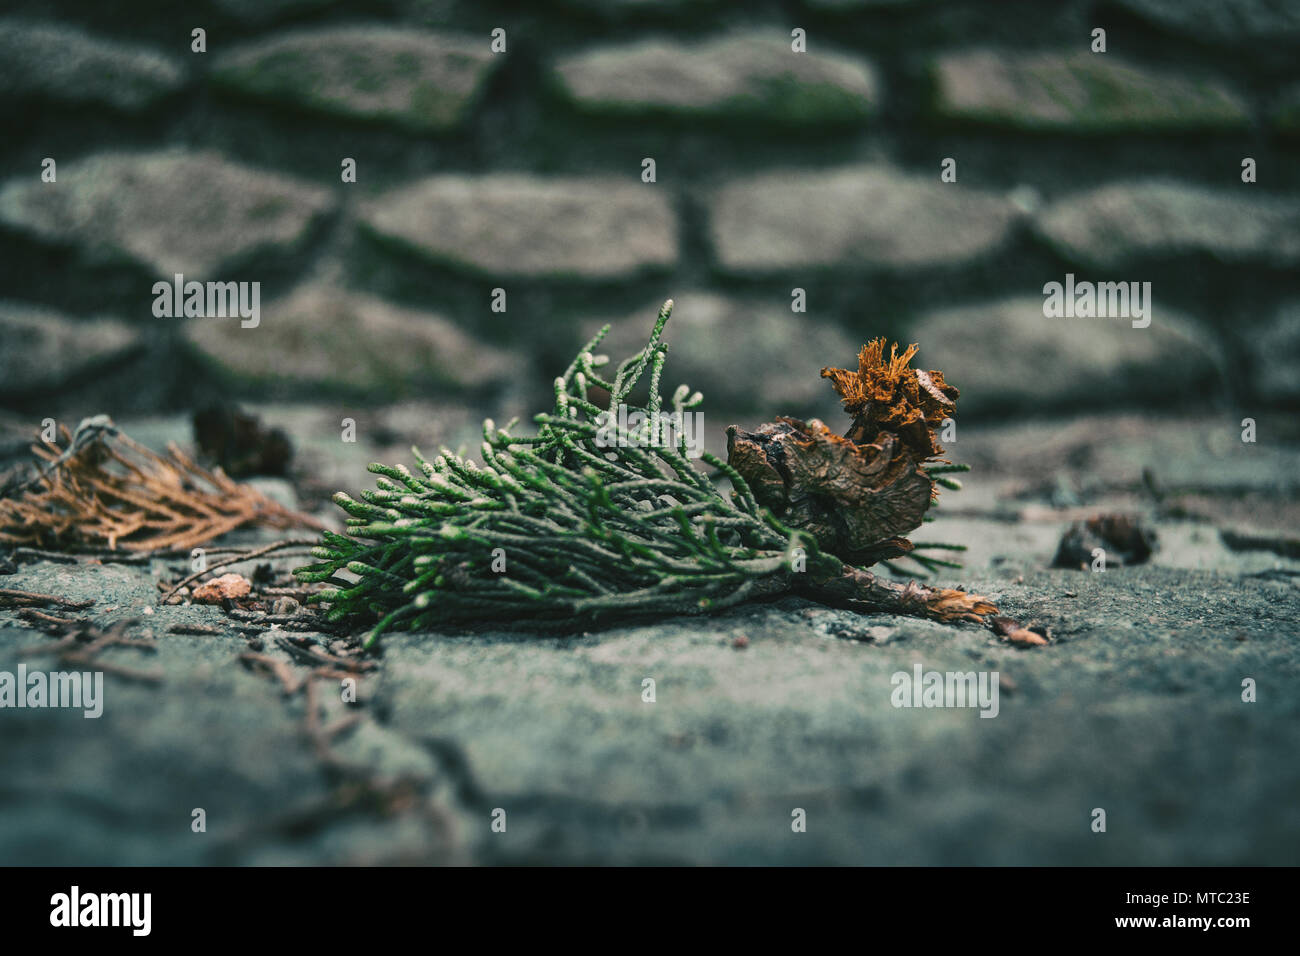 leaves and round fruit of cupressus sempervirens on the stone floor Stock Photo